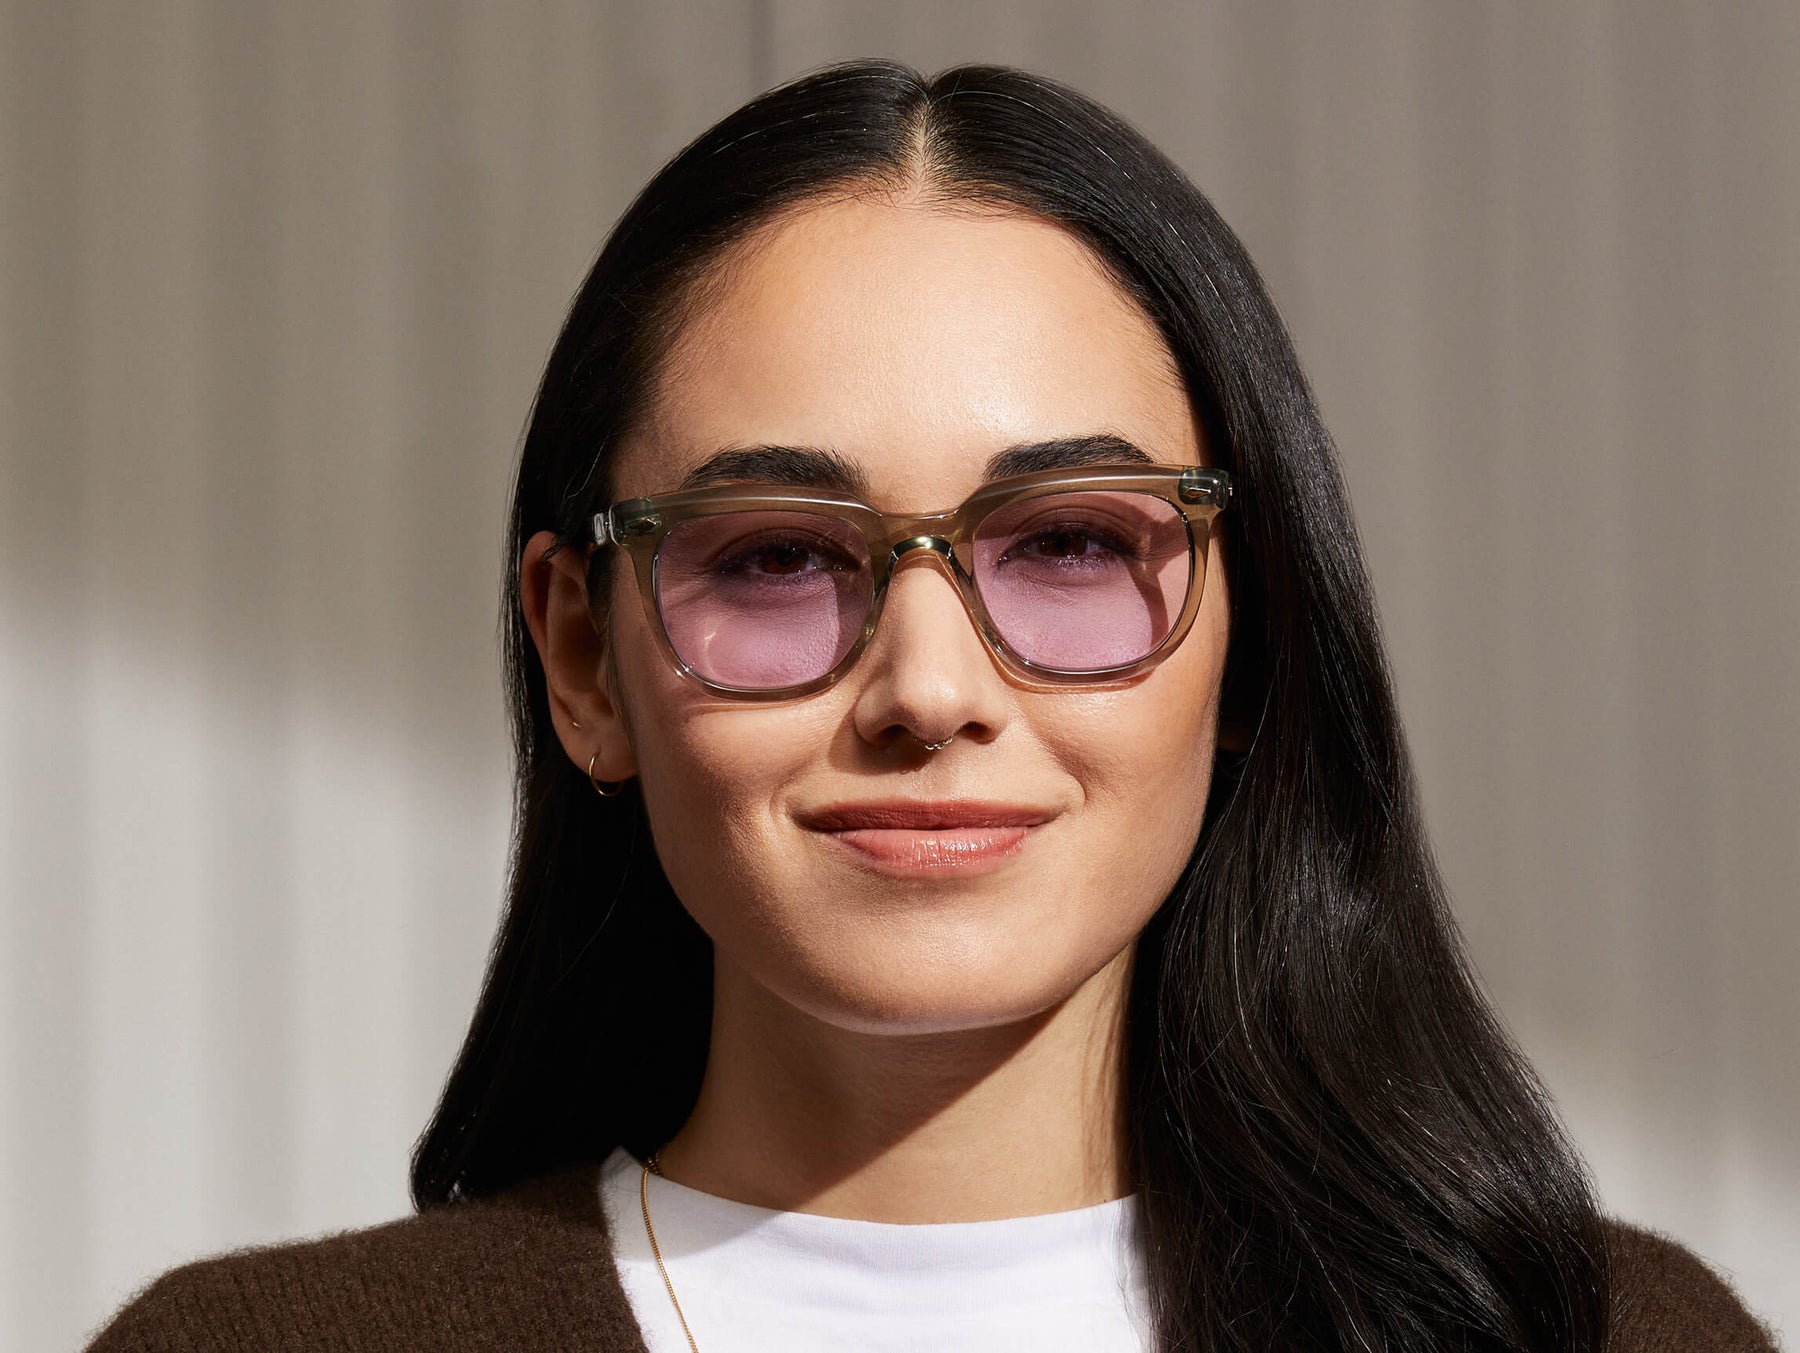 Model is wearing The YONTIF in Sage in size 49 with Lavender Tinted Lenses